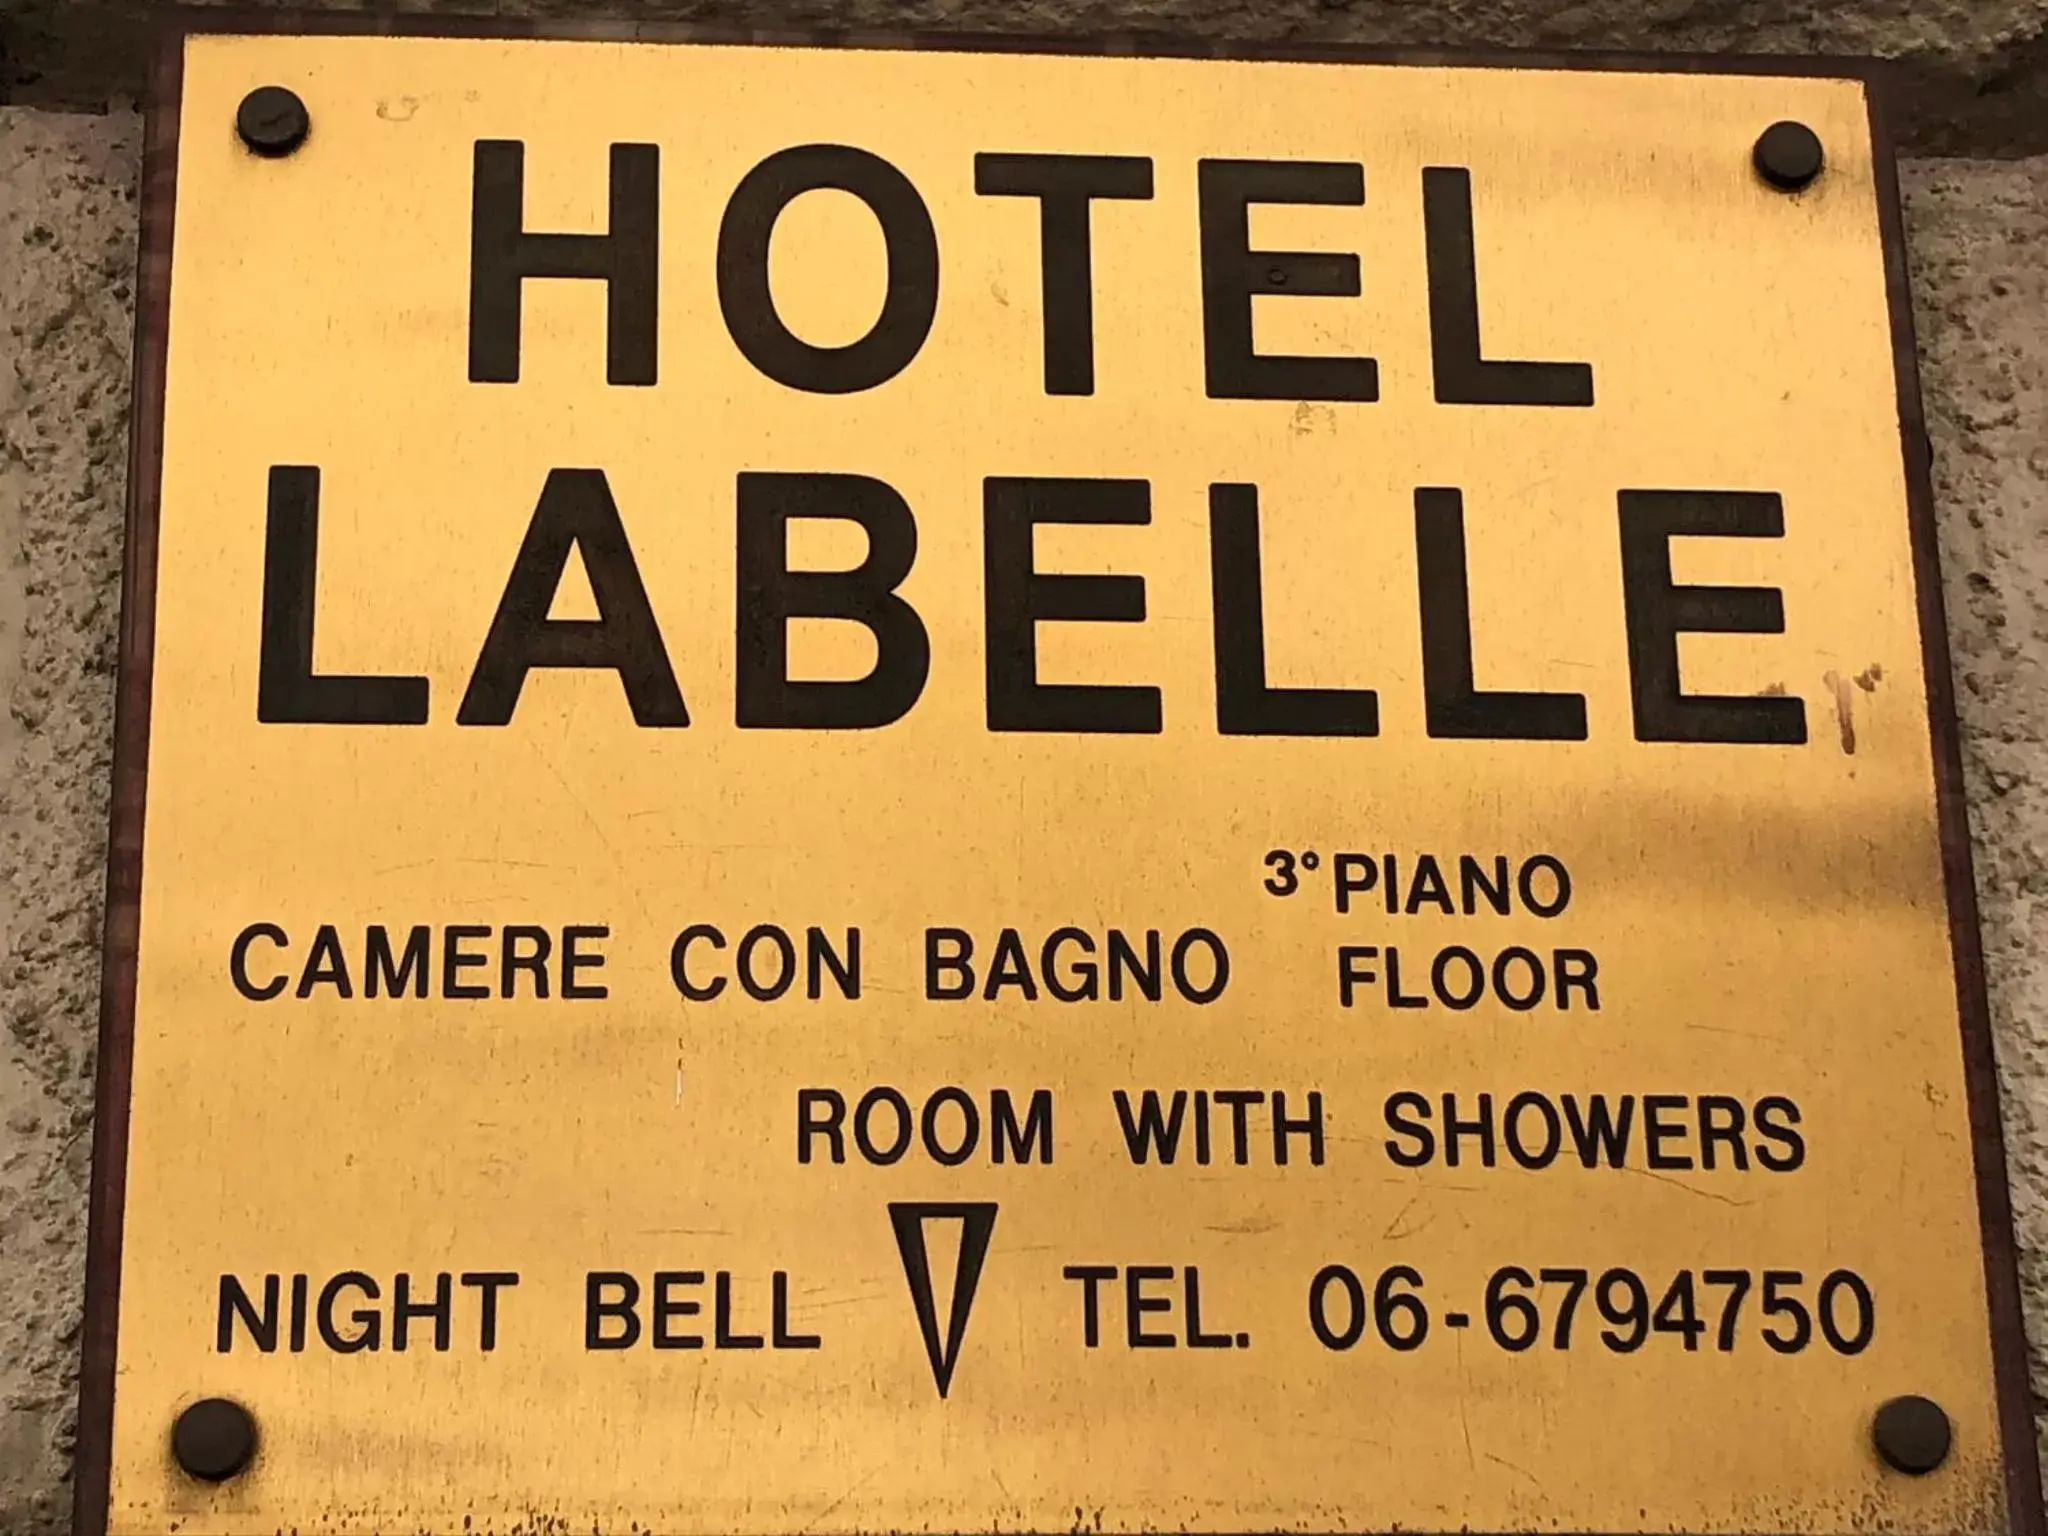 Property building in Hotel Labelle